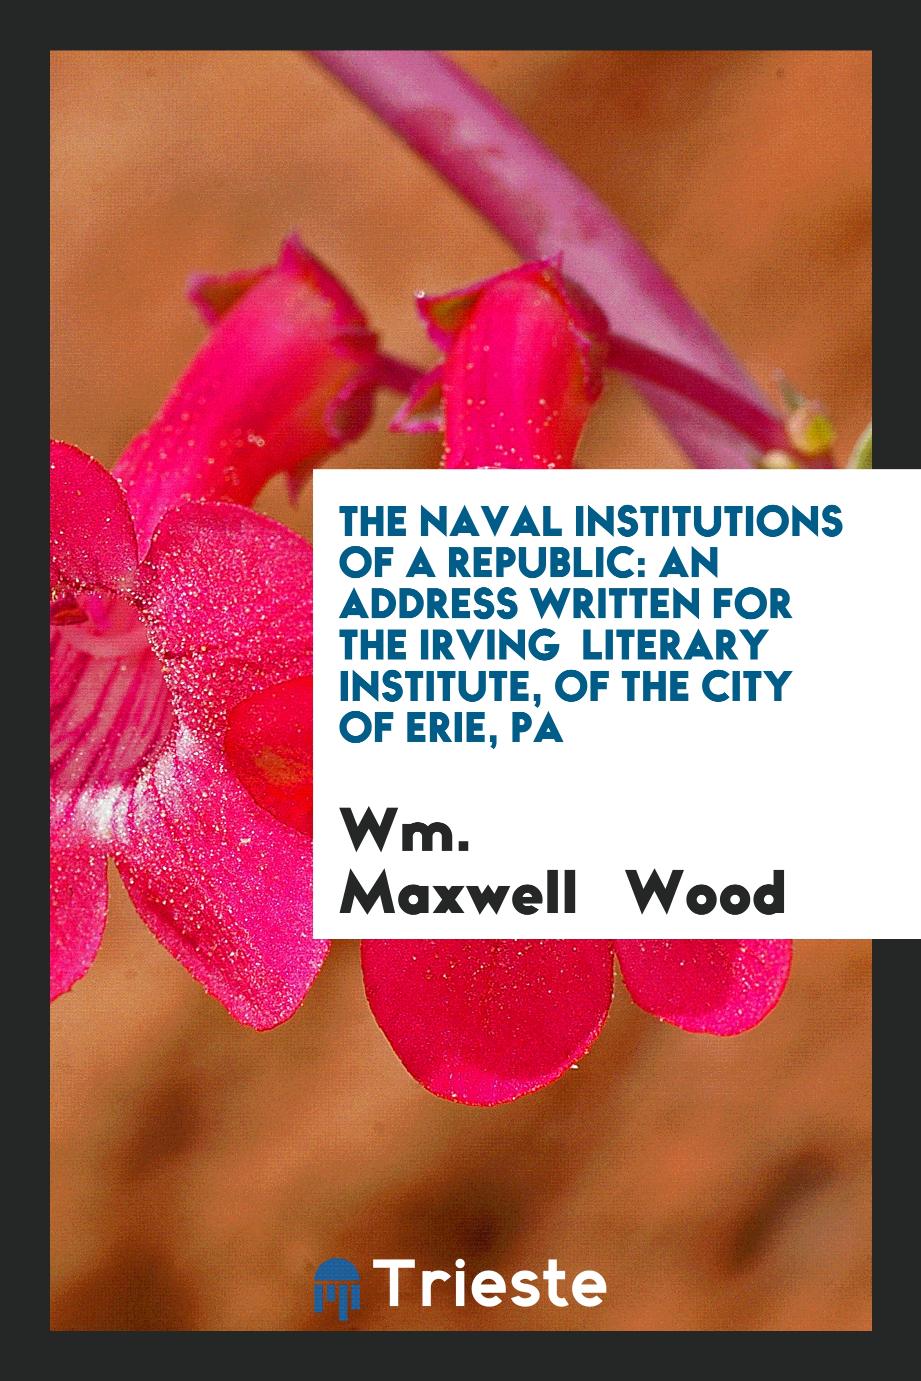 The Naval Institutions of a Republic: An Address Written for the Irving Literary Institute, of the City of Erie, Pa